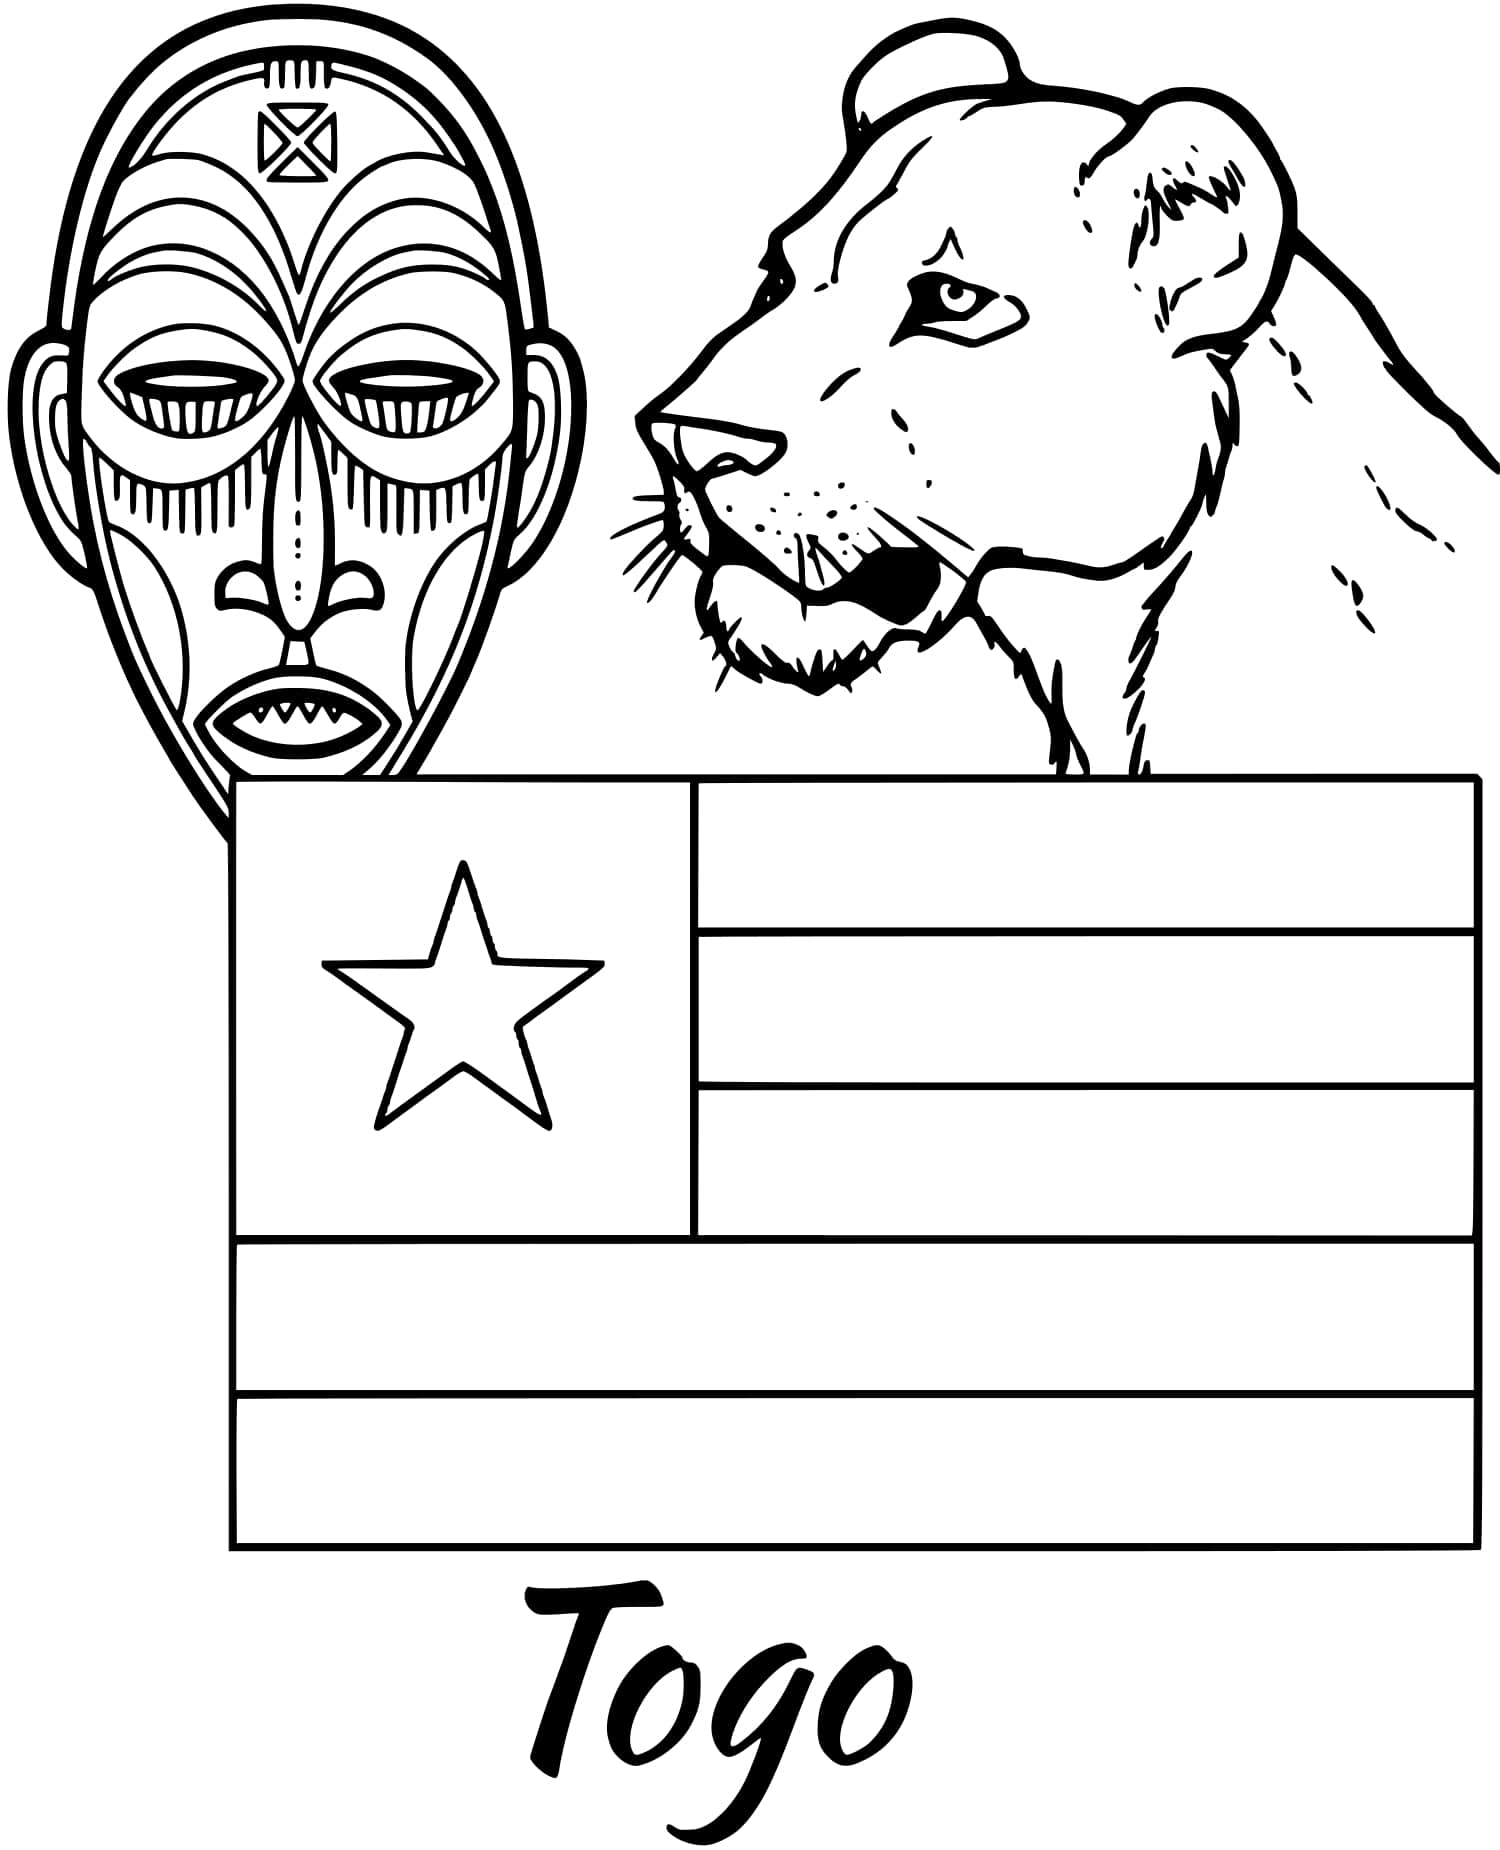 Togo Flag Tribal Mask Coloring Page